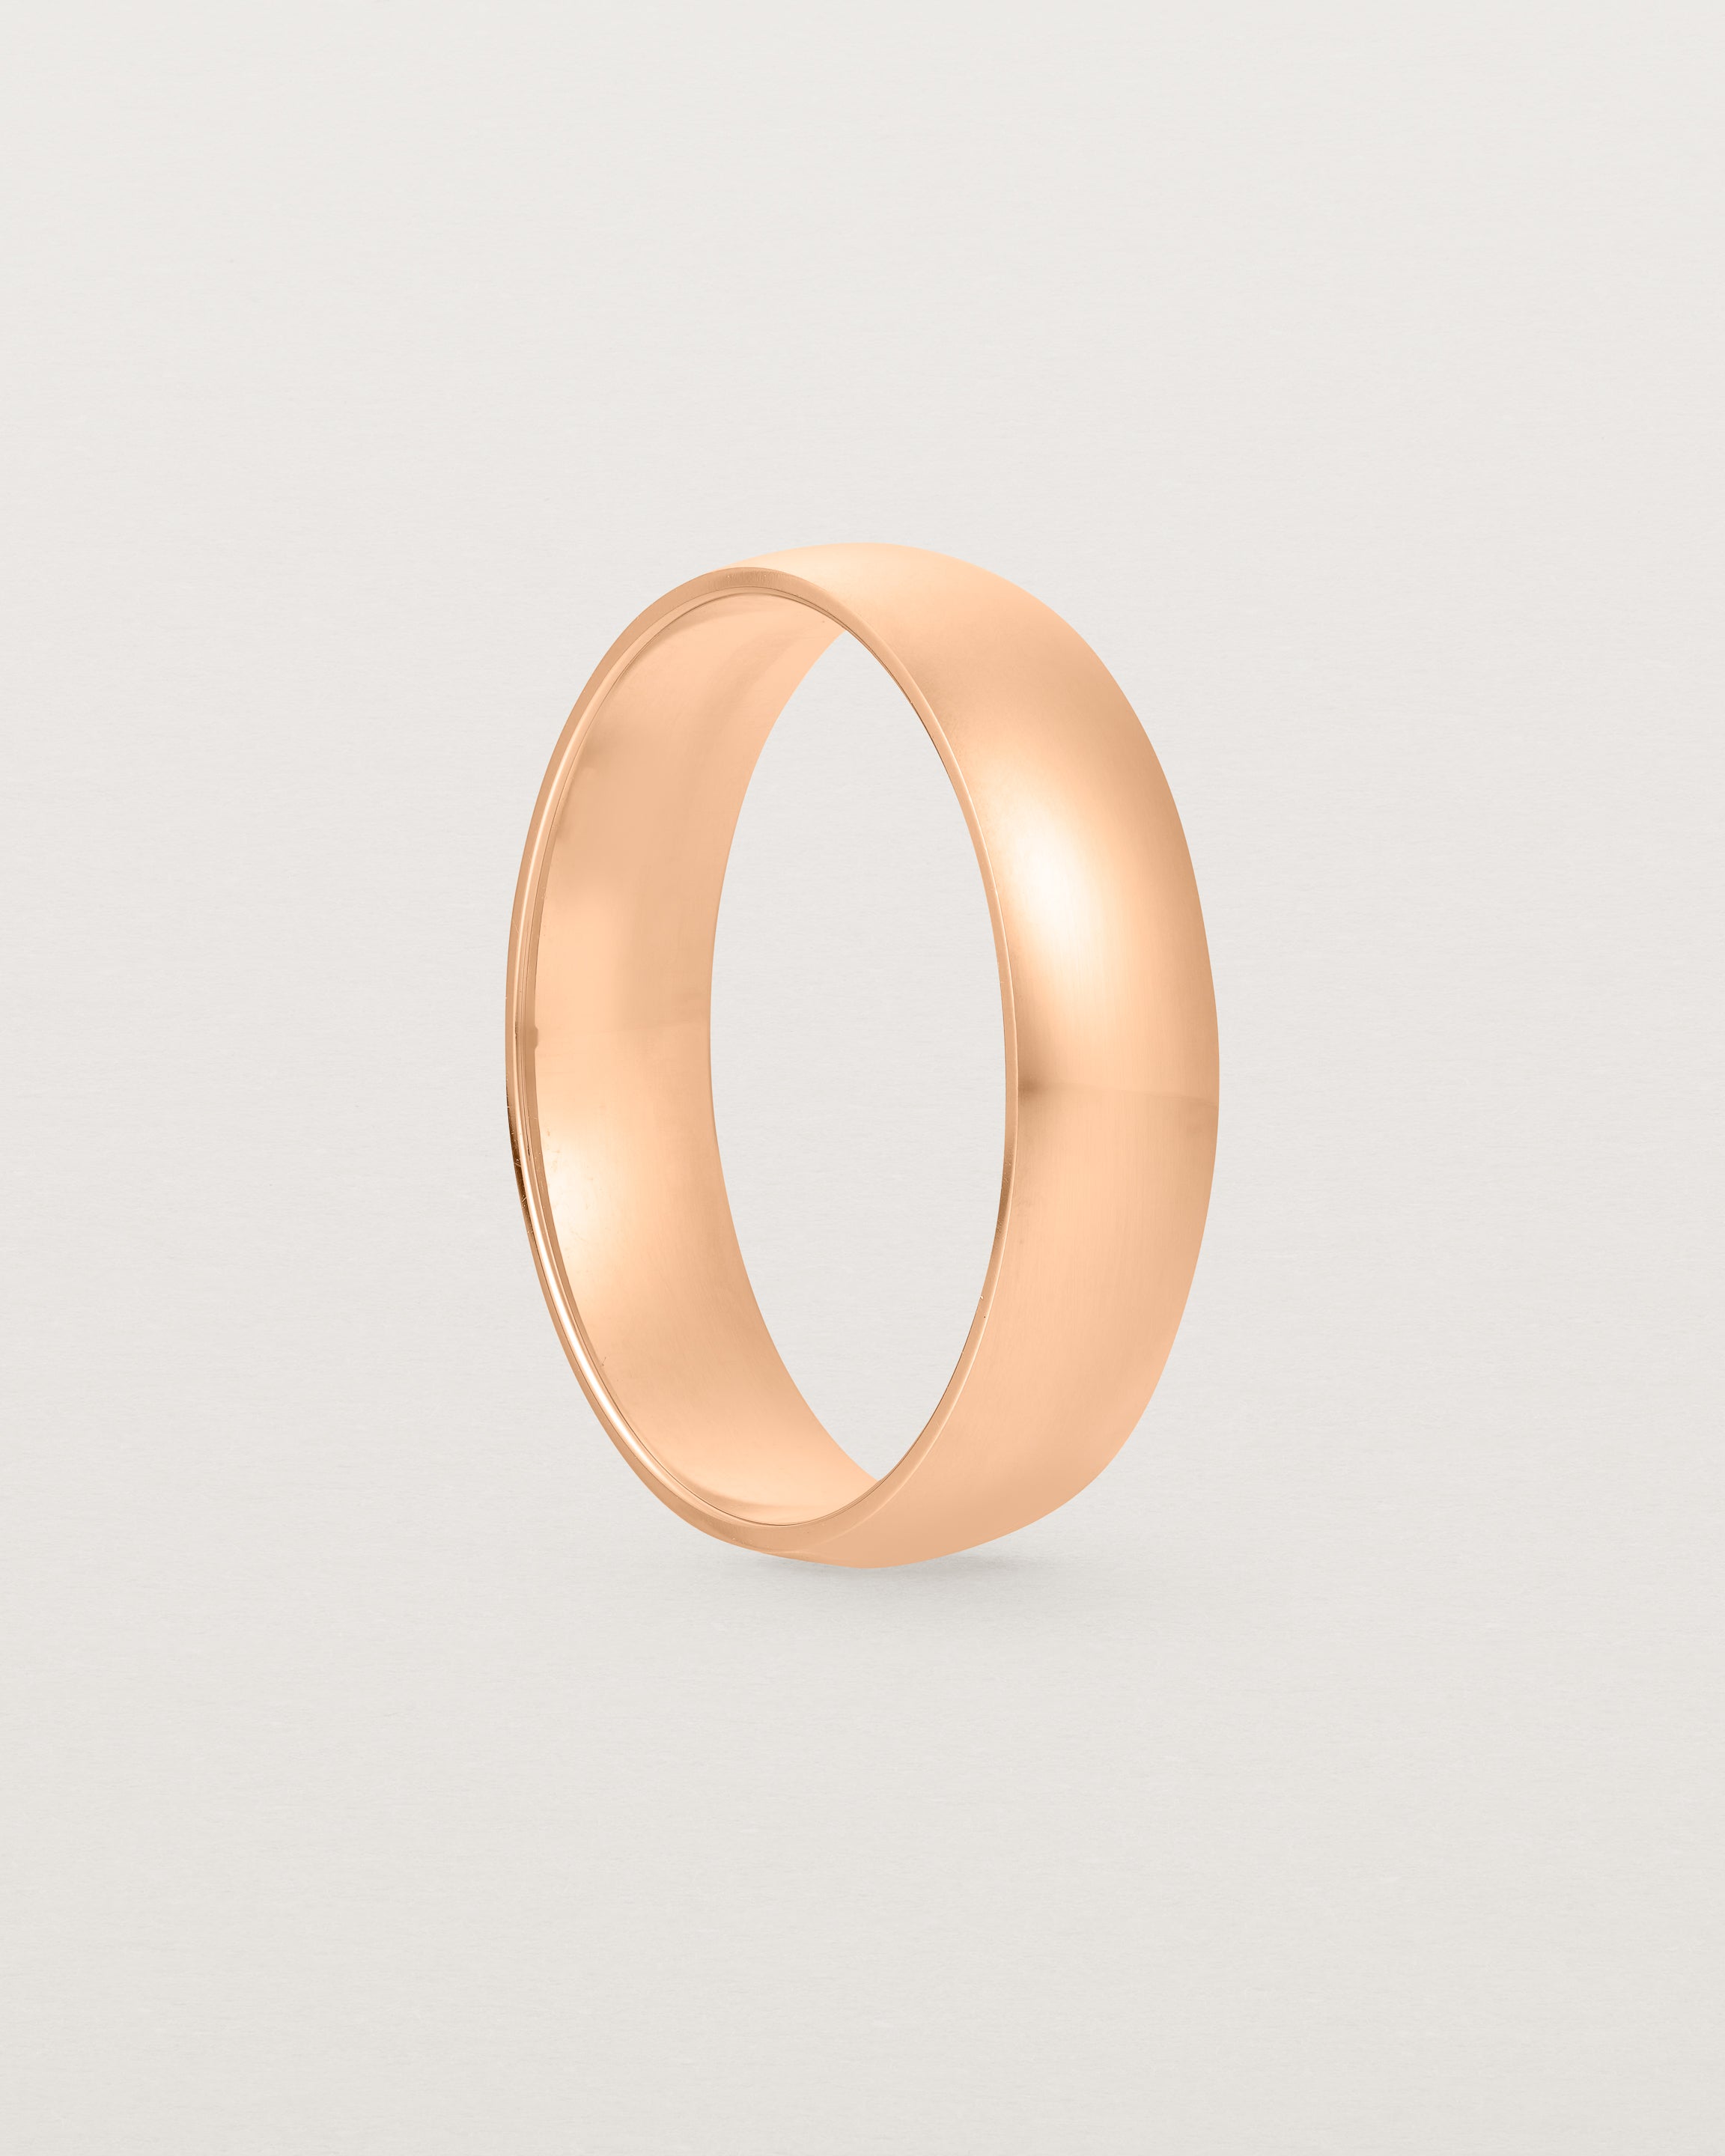 A 5mm wedding band, our most popular width, crafted in rose gold.